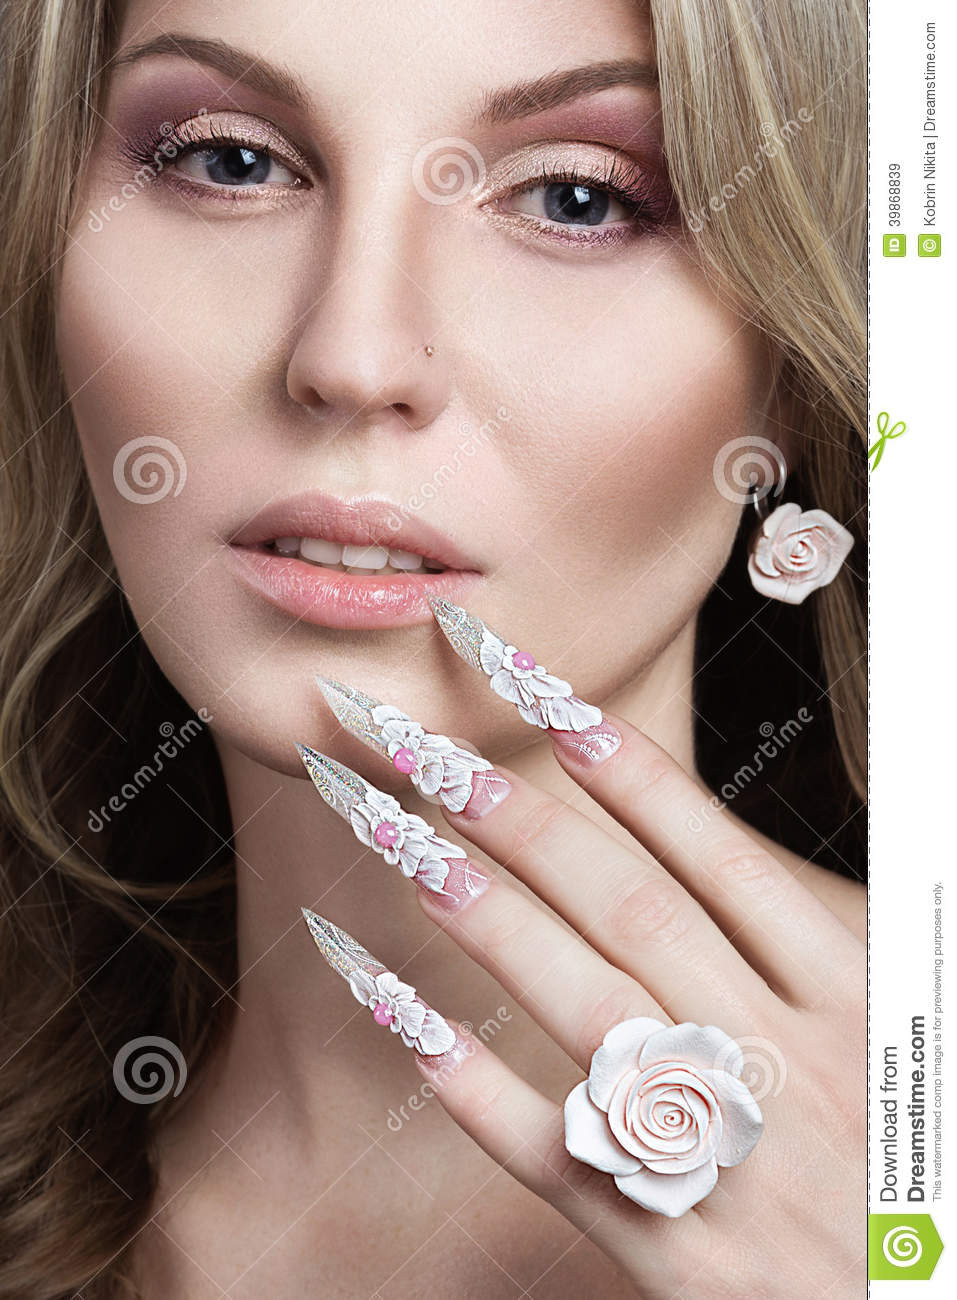 Pretty Women Nails
 Beautiful Girl With Long Nails Stock Image Image of